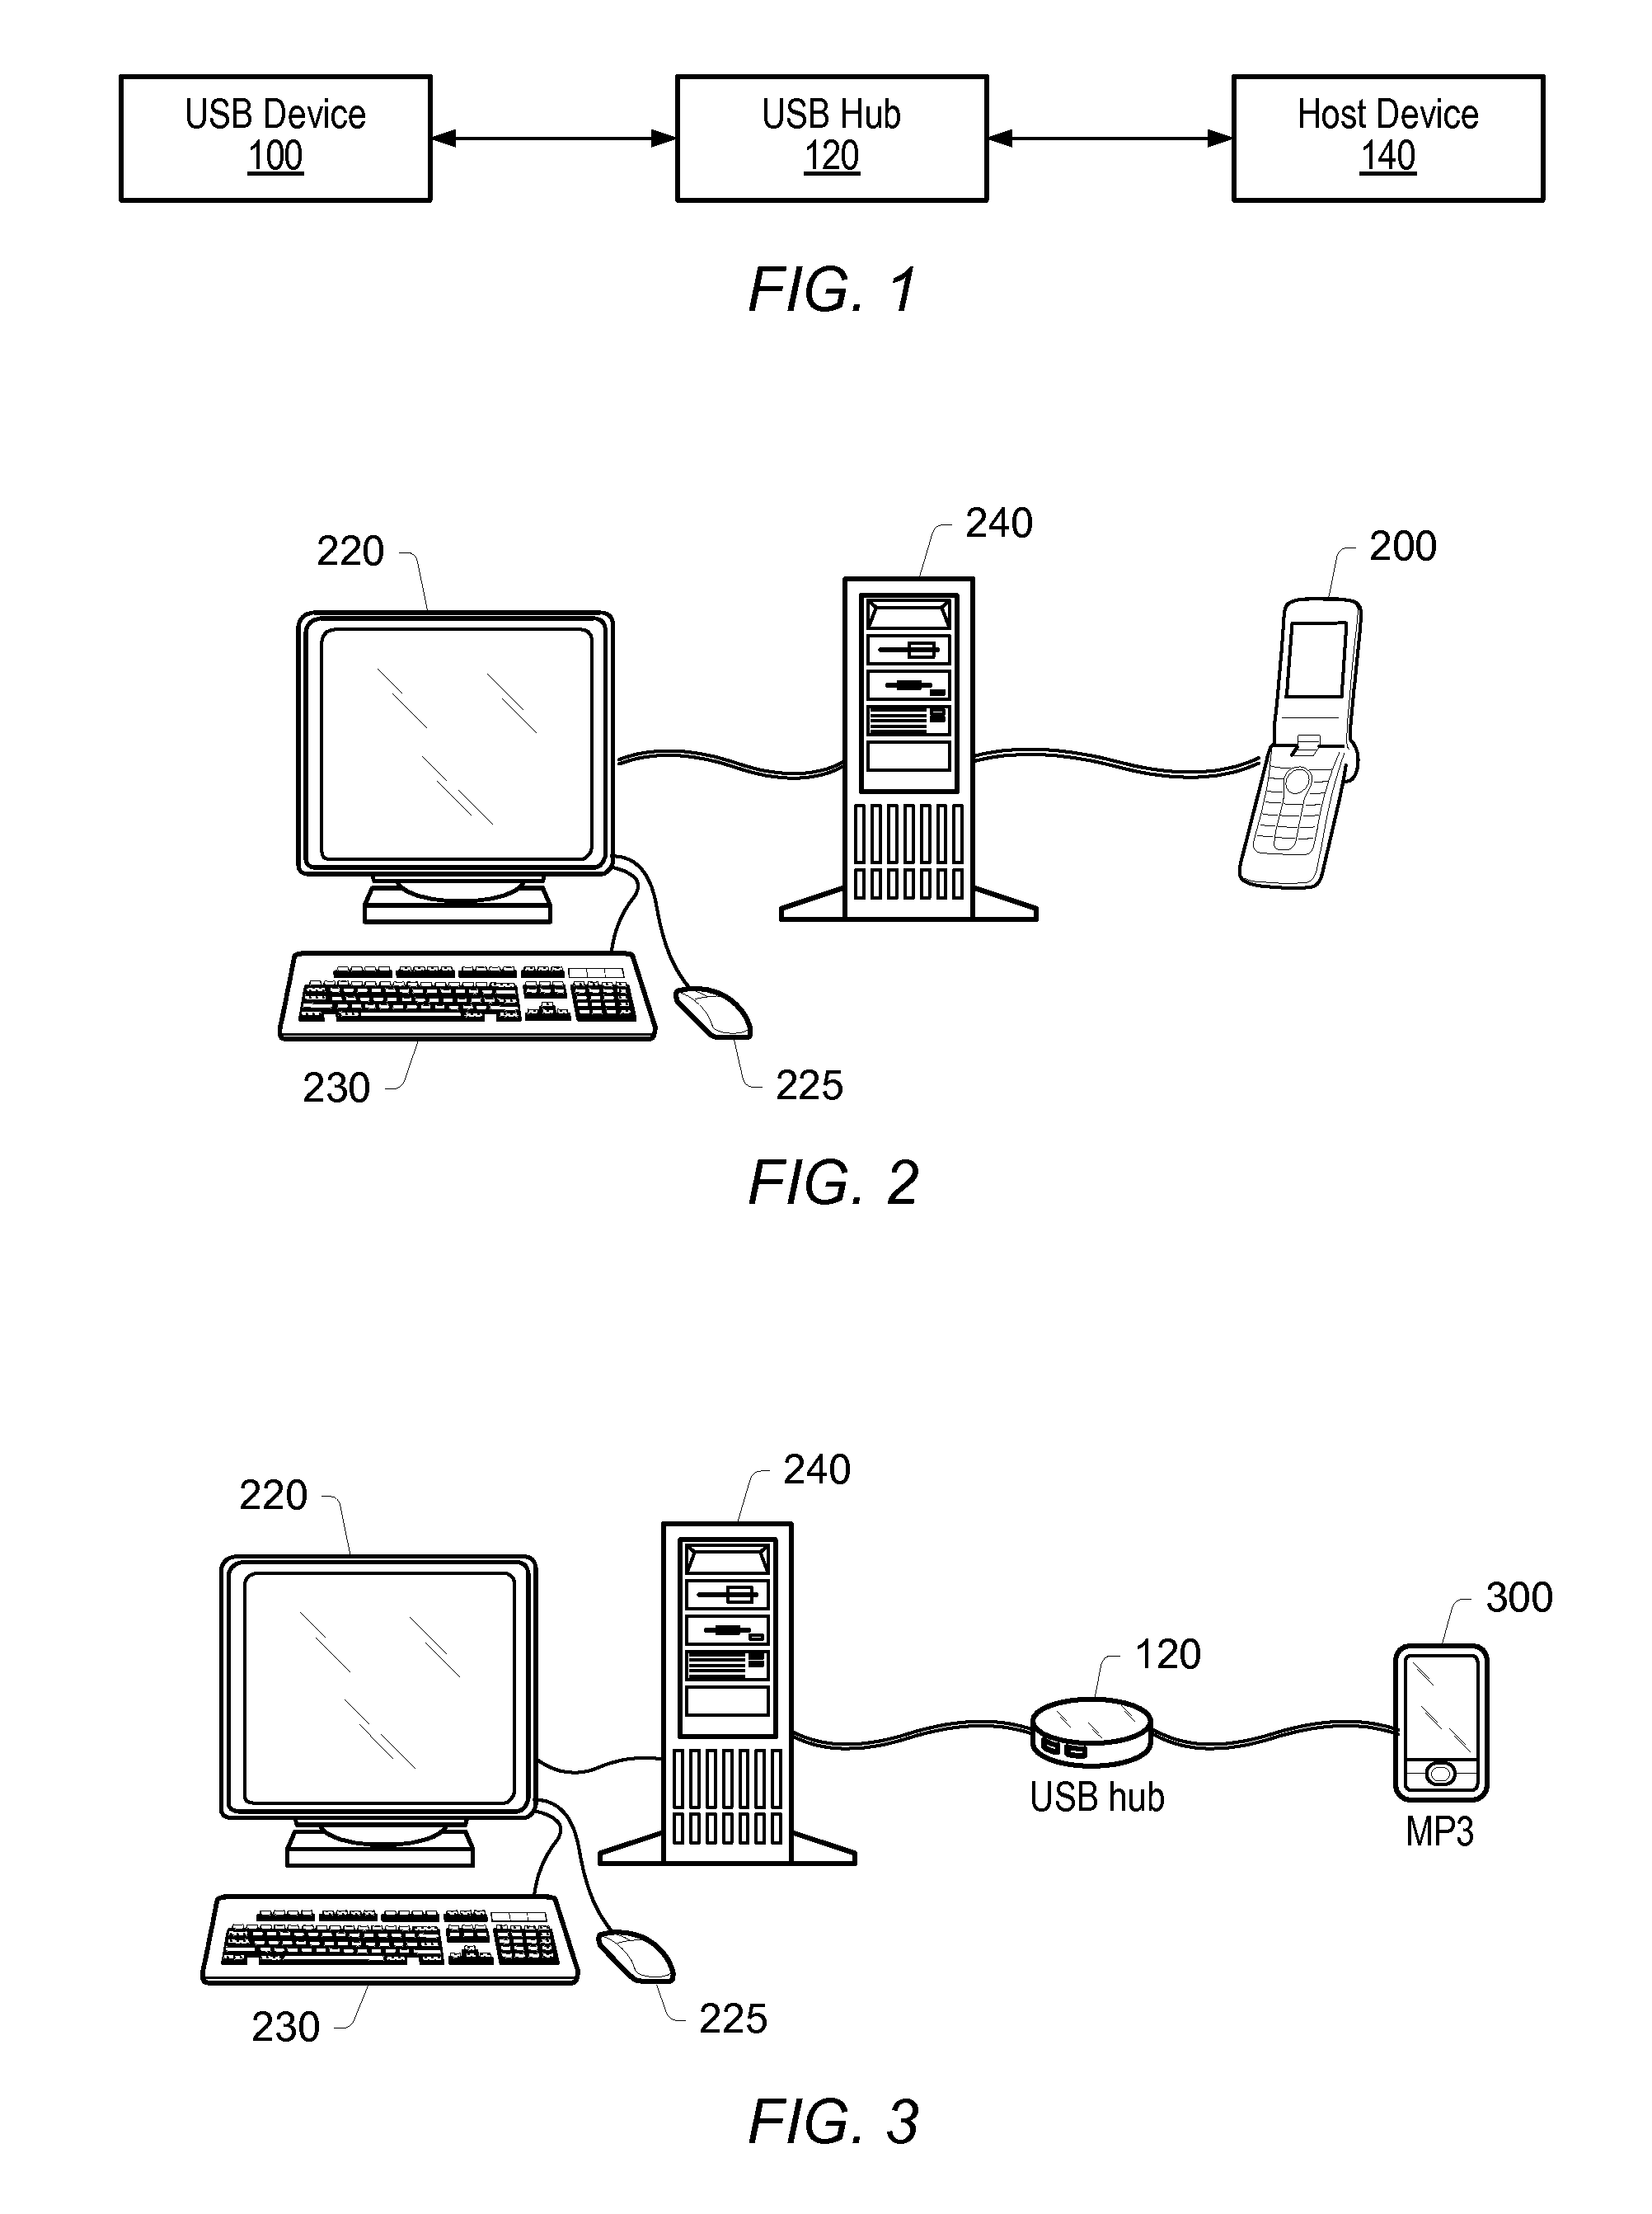 System and Method for Rapidly Charging a USB Device